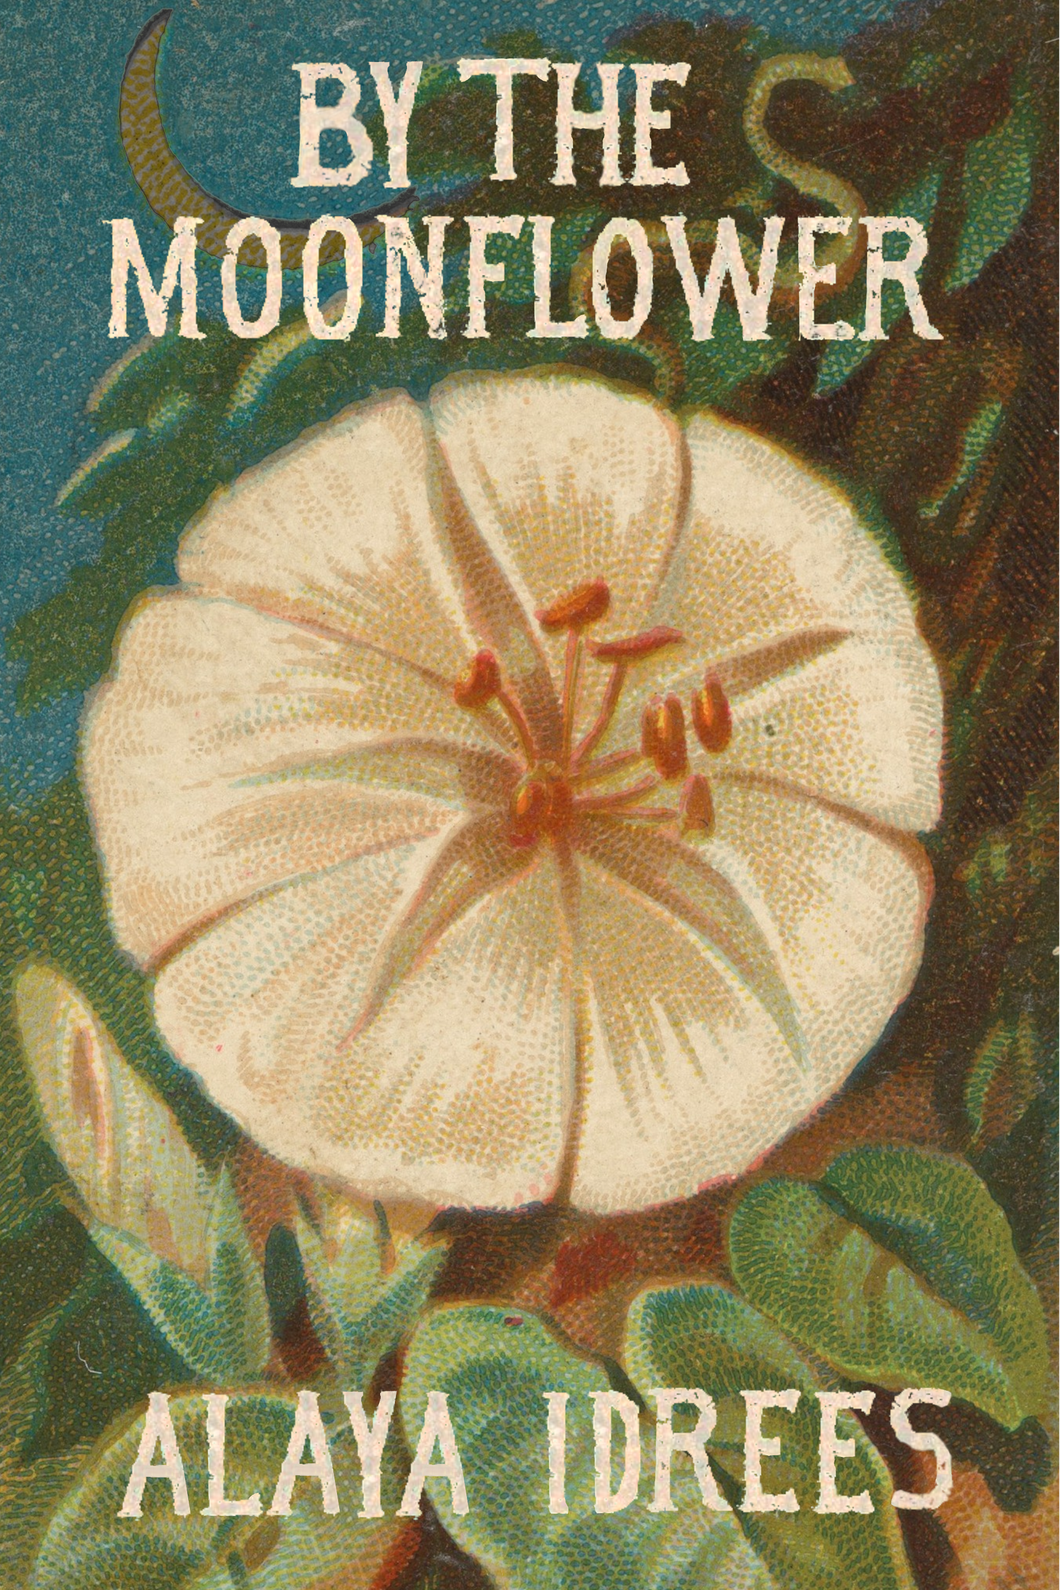 By the Moonflower, by Alaya Idrees-Print Books-Bottlecap Press